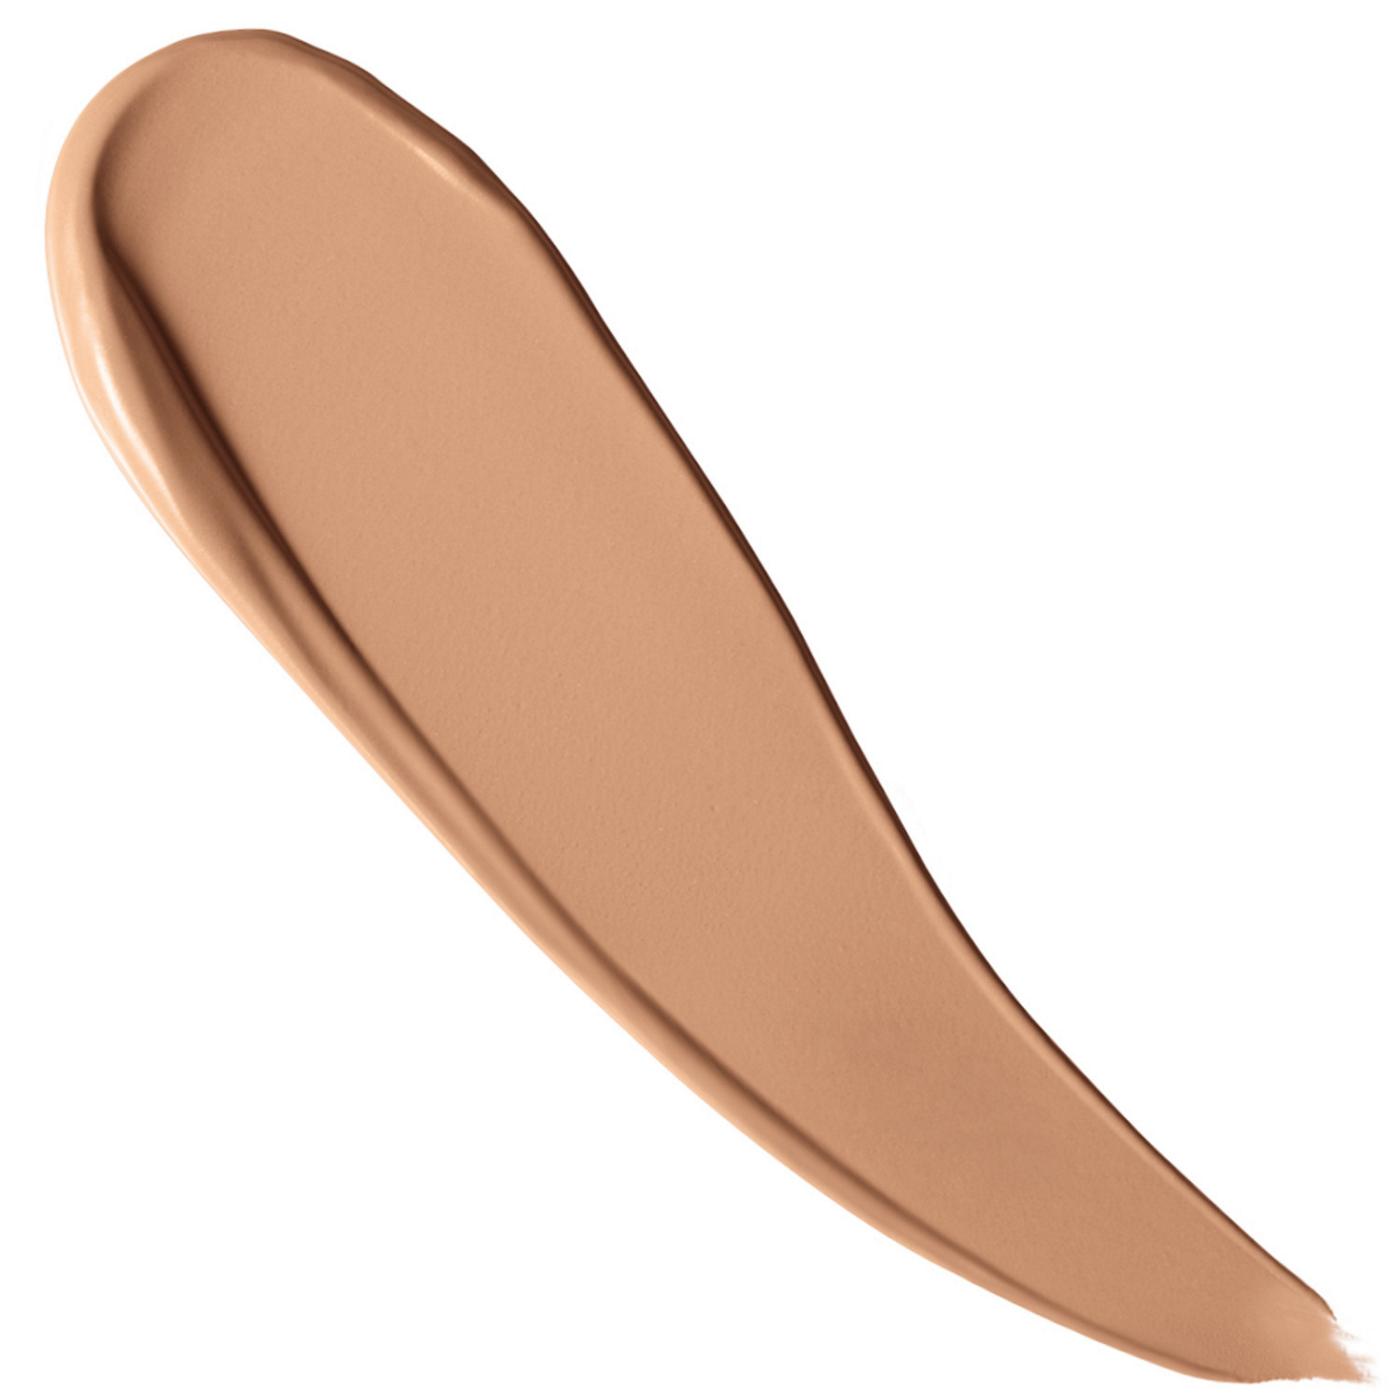 Covergirl Simply Ageless 3-in-1 Liquid Foundation 245 Warm Beige; image 6 of 6